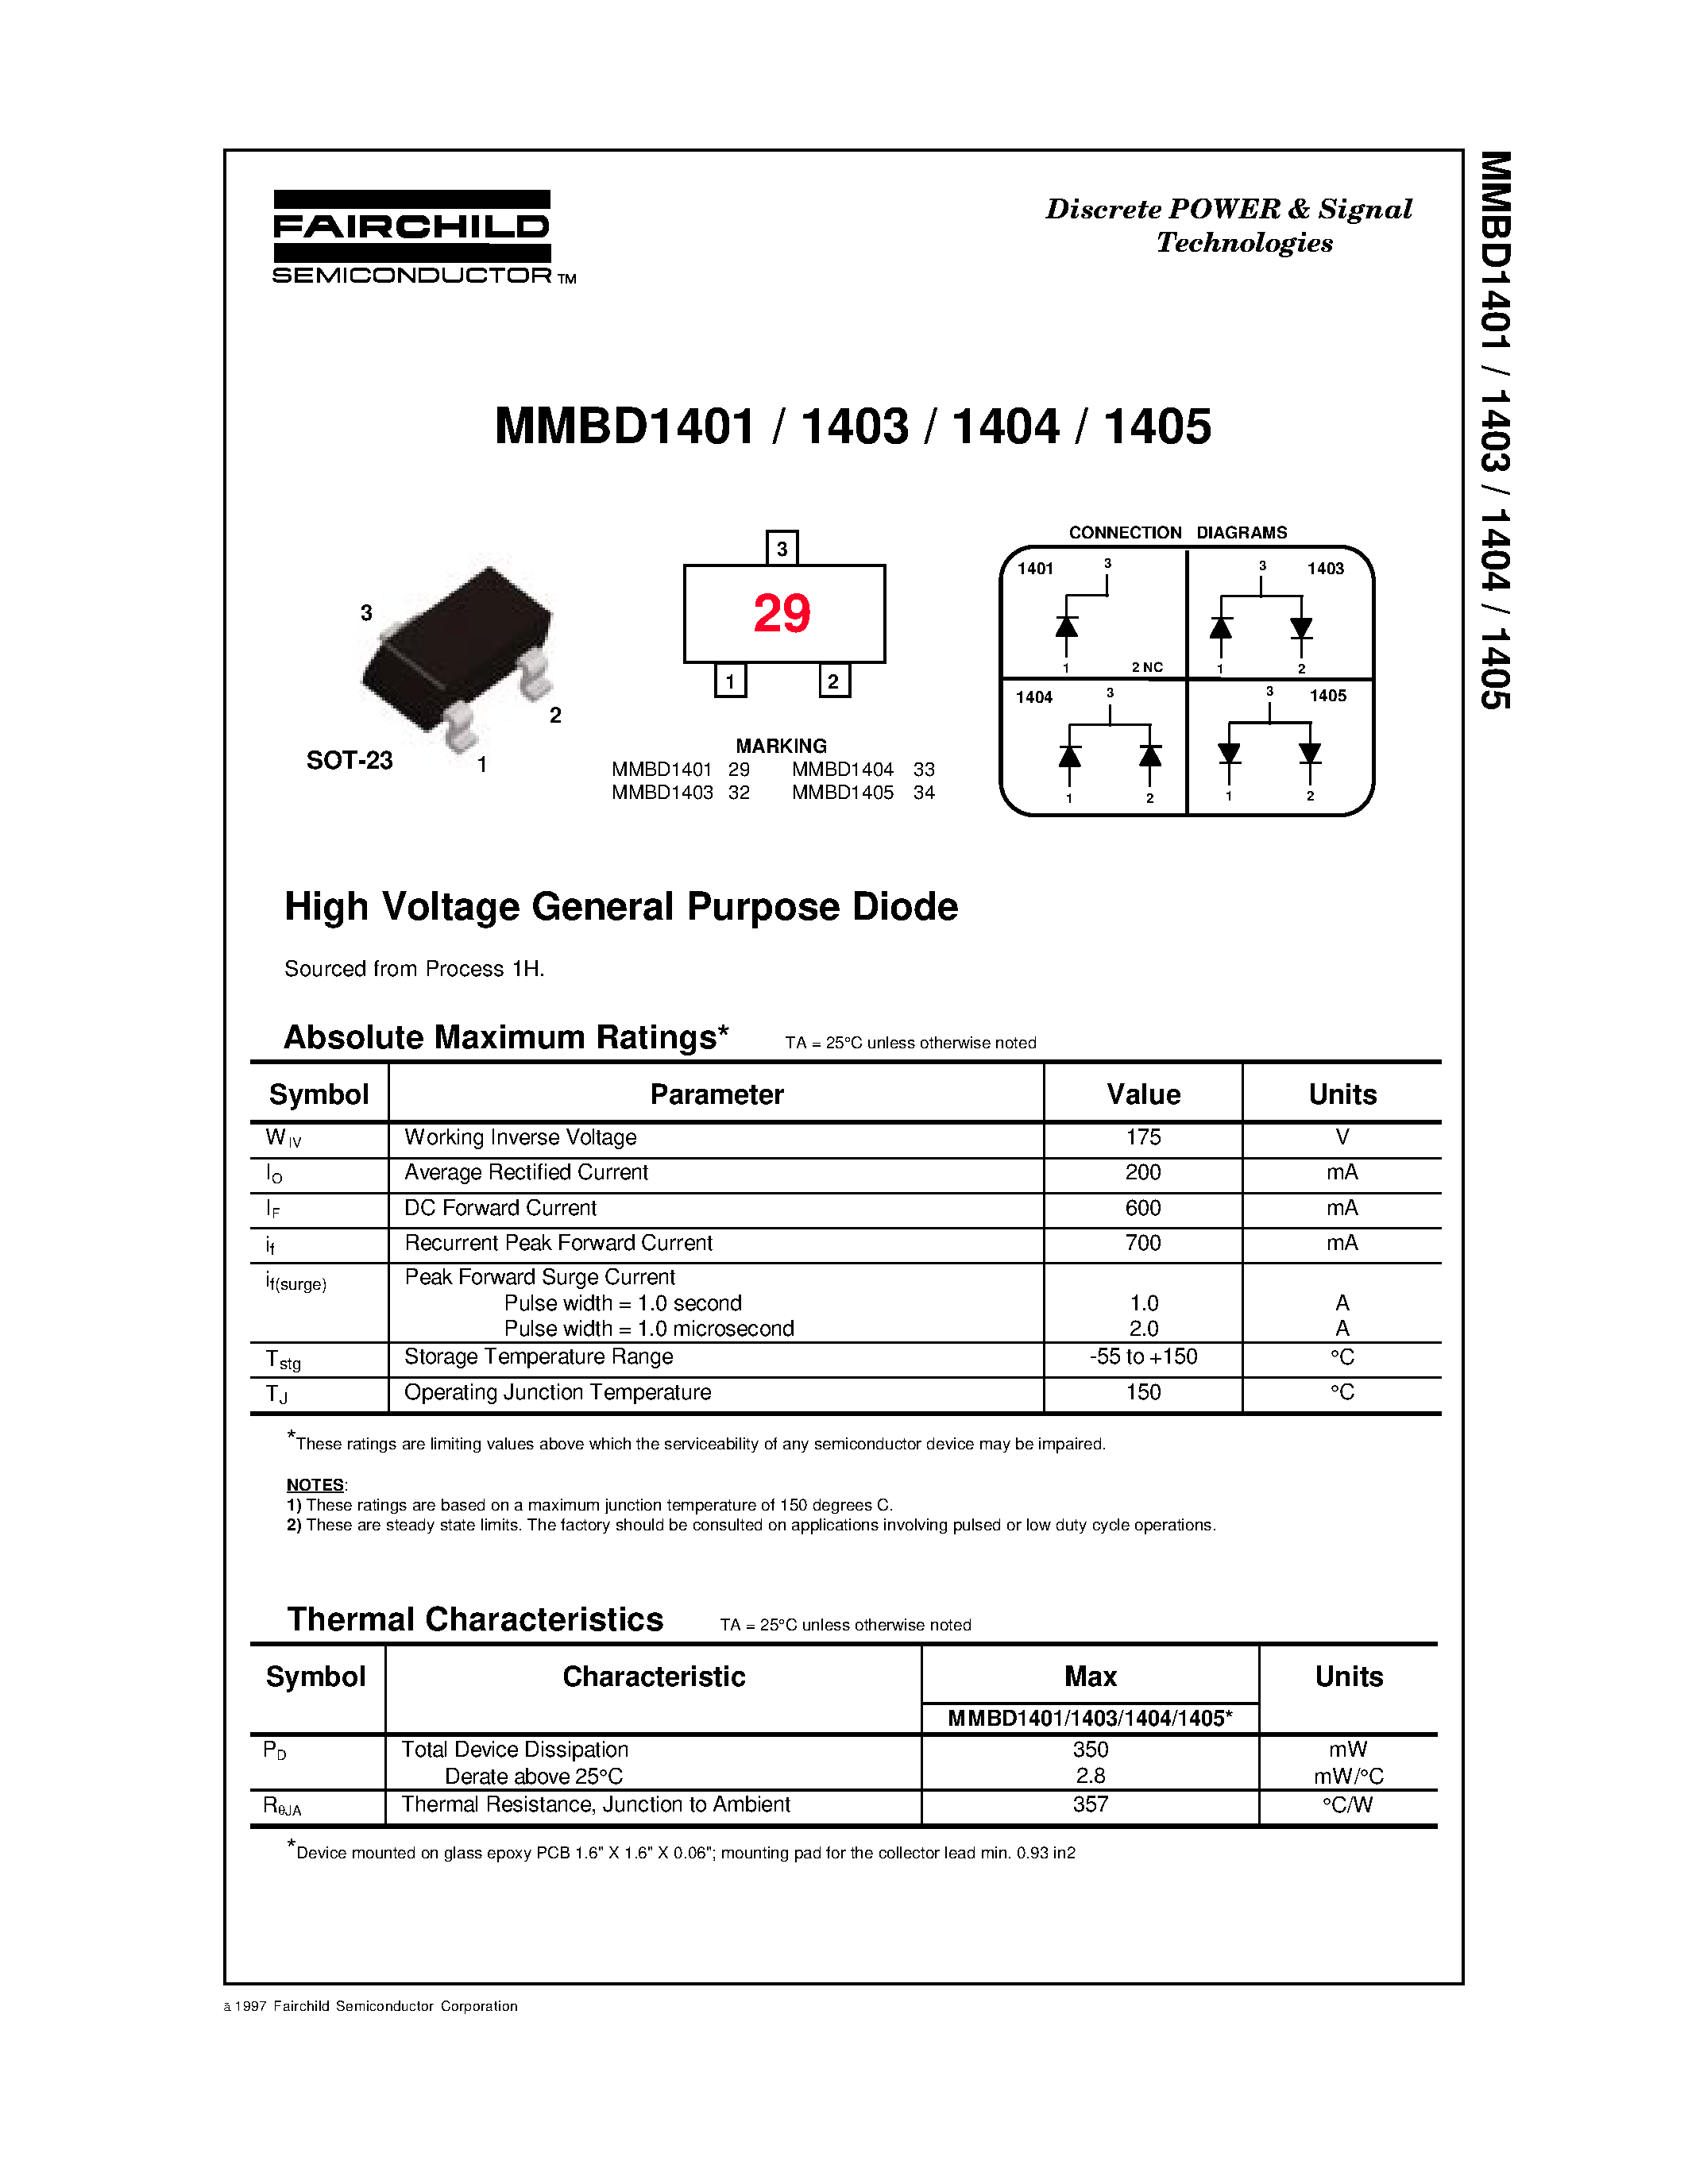 Даташит MMBD1401 - High Voltage General Purpose Diode страница 1